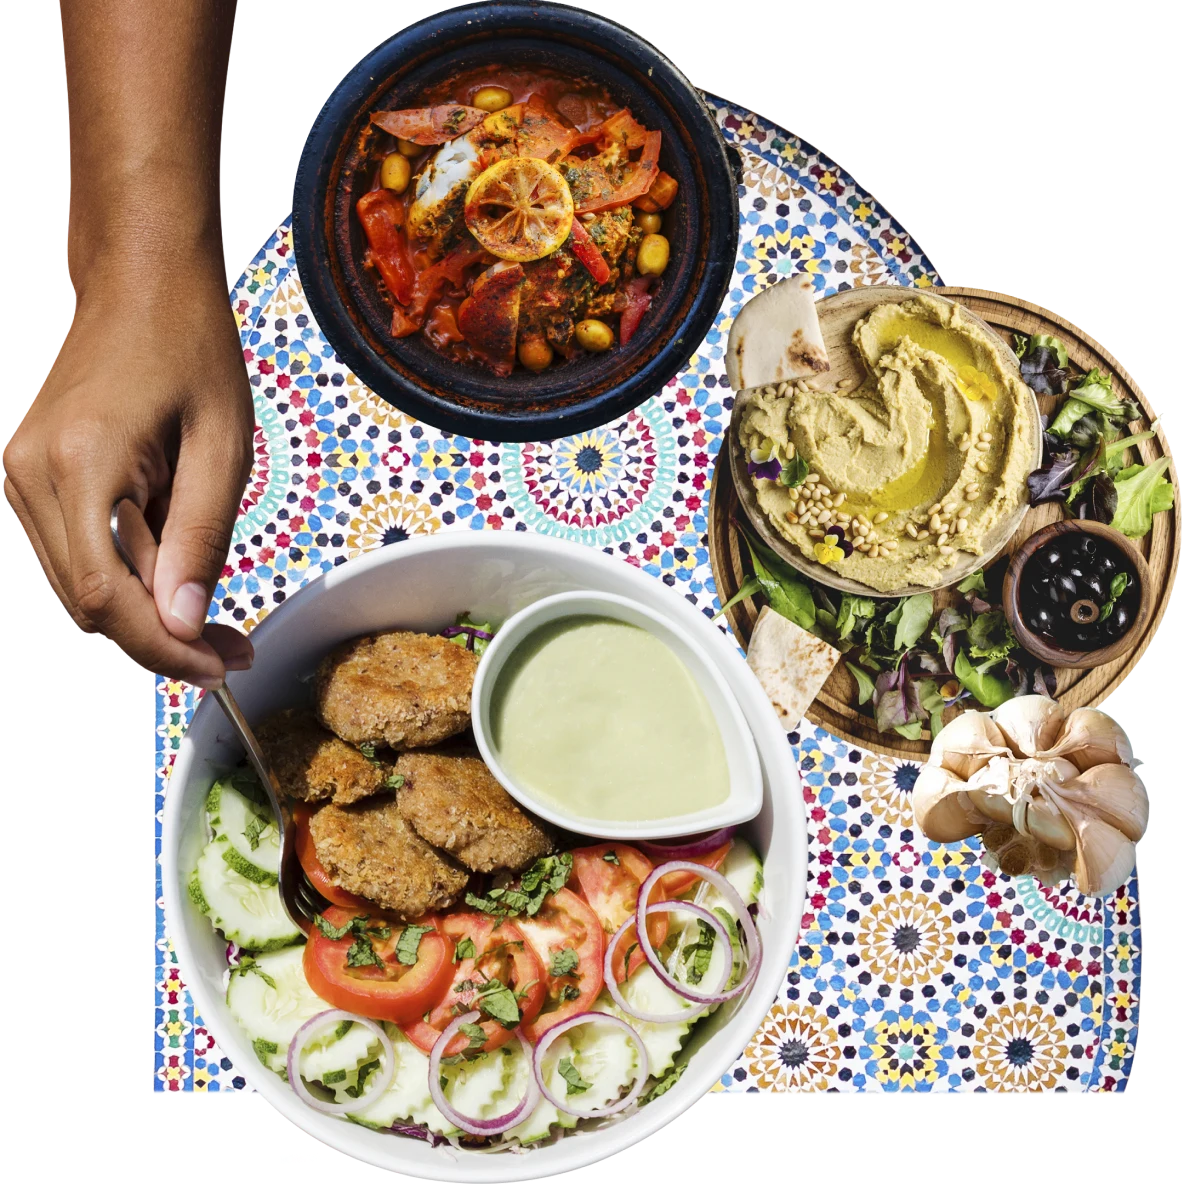 Collage of aerial views of middle-eastern food. Bowl with falafel patties, cucumber and tomato slides, onions and basil with a smaller bowl of sauce on the left. Bowl at right with pita bread, salad and hummus. Bowl at top with a tomato and corn stew.